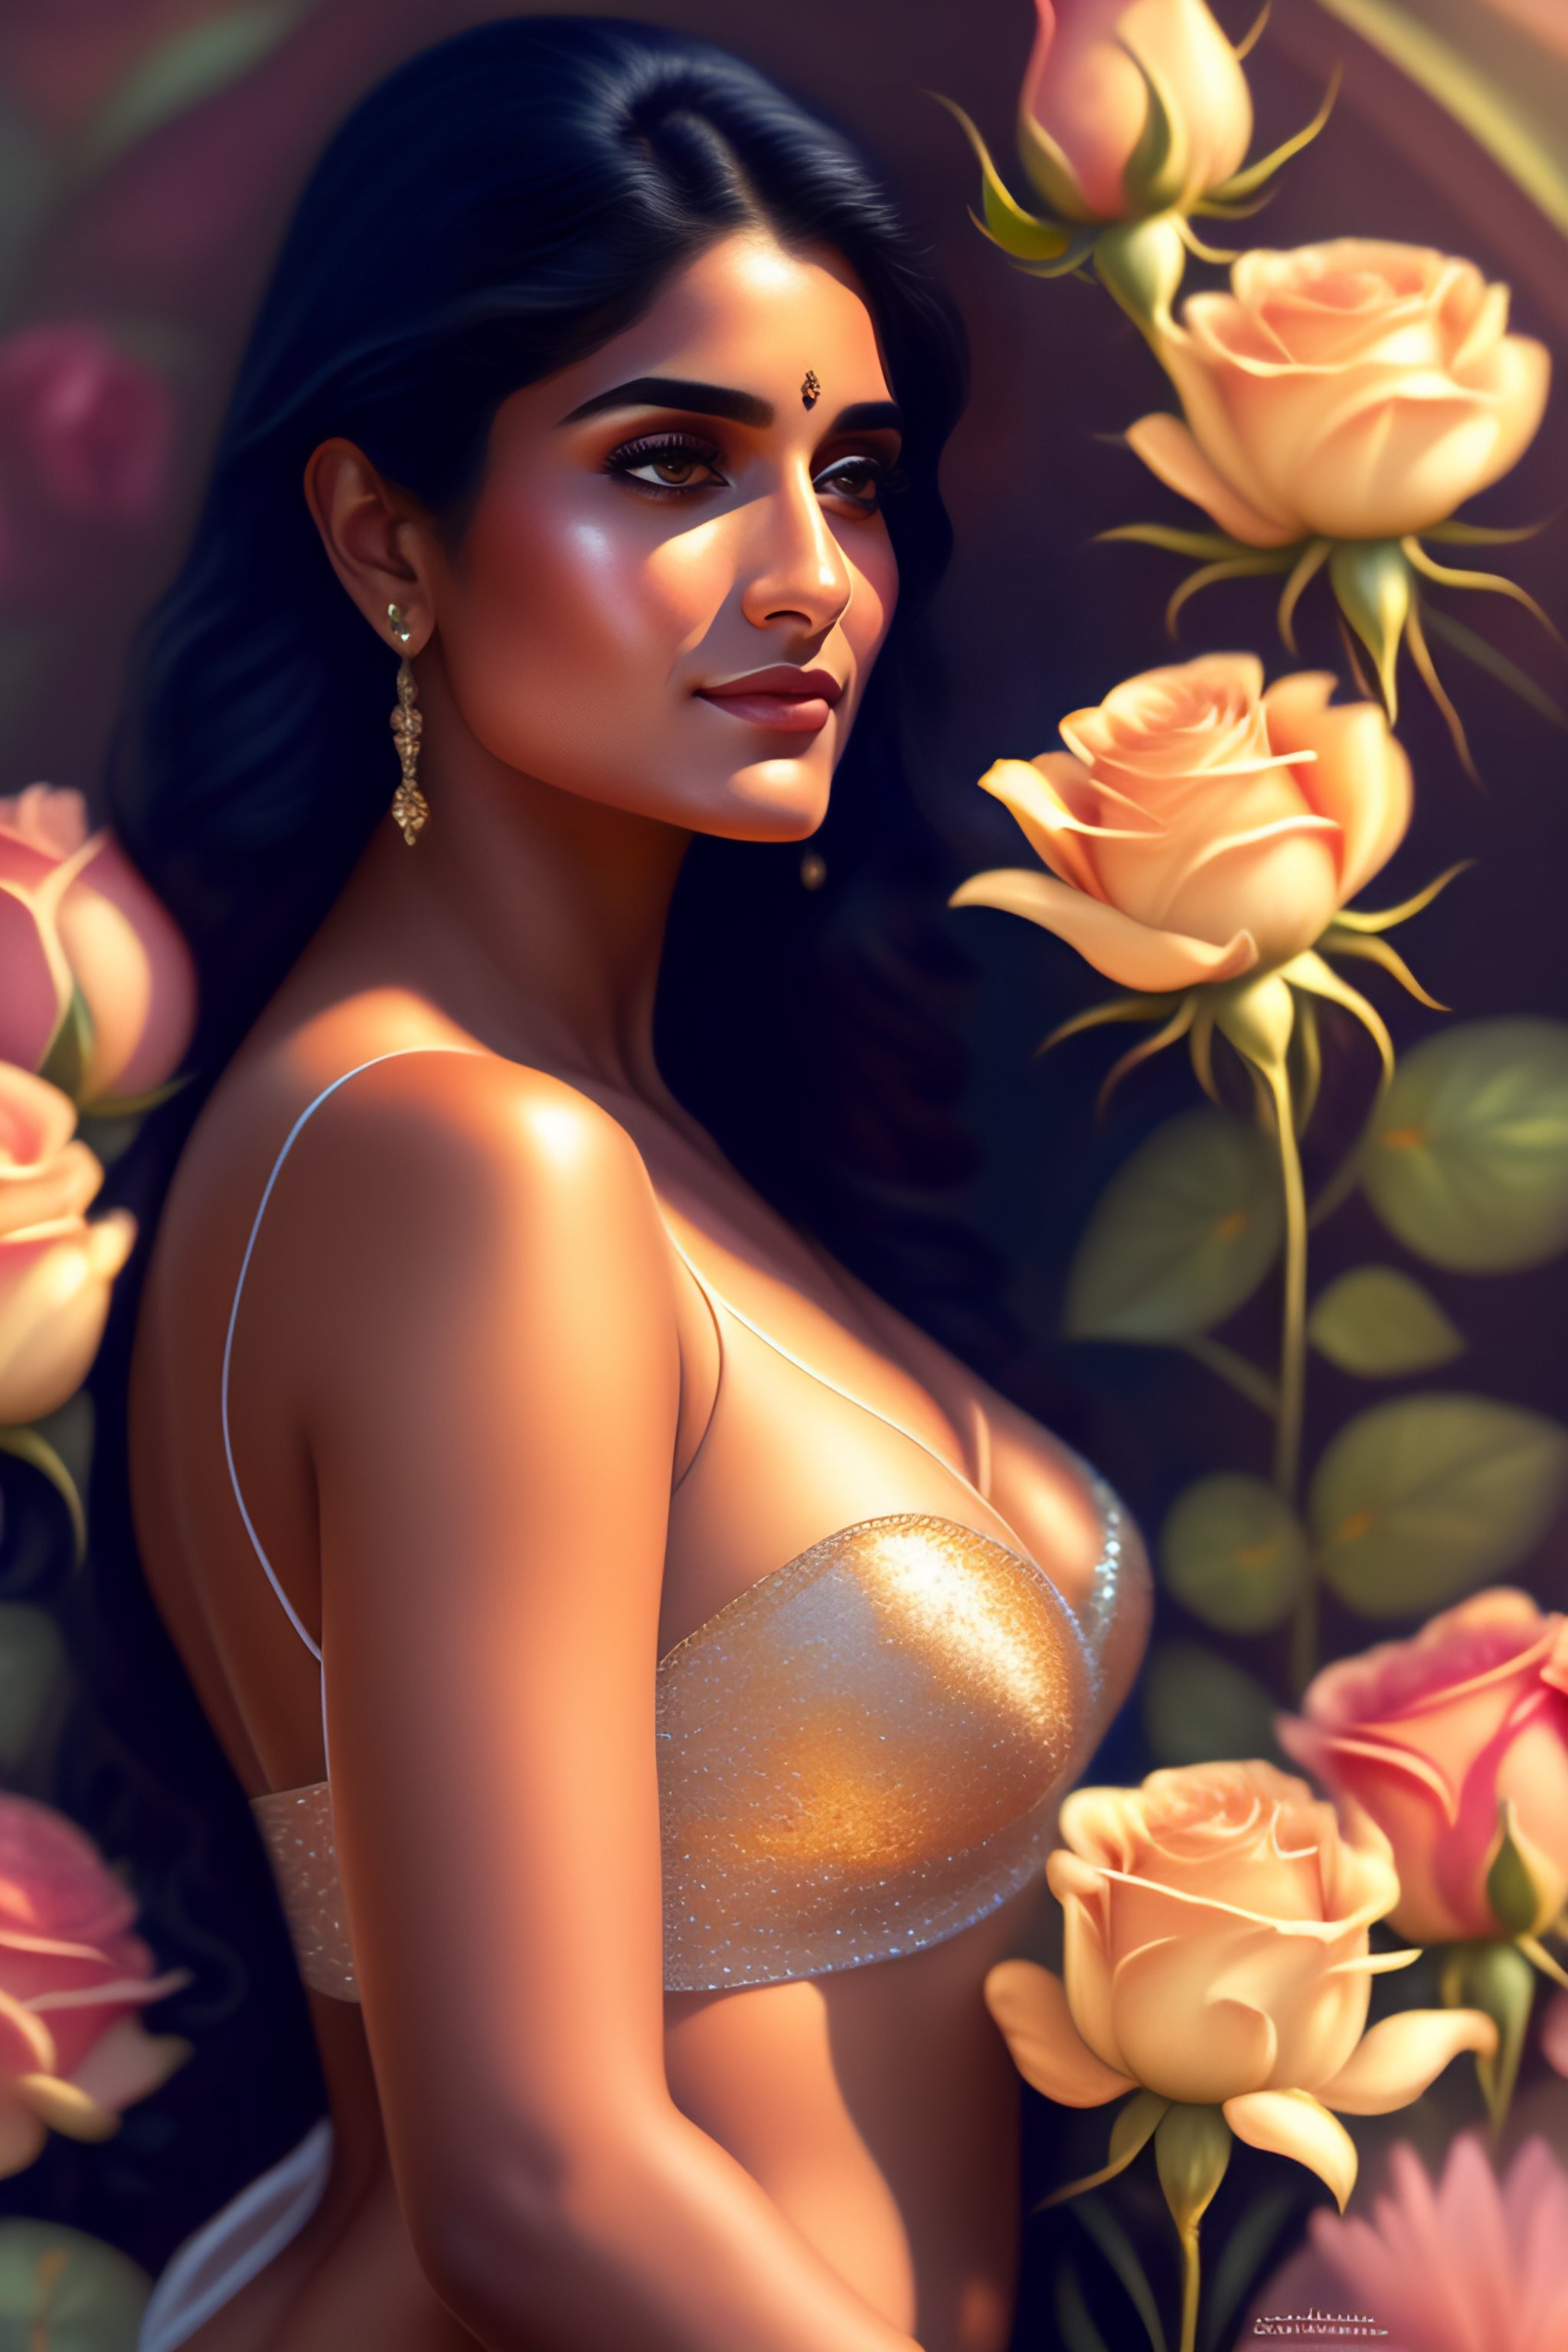 Lexica - Spanish woman niveda thomas, smelling a flower, roses